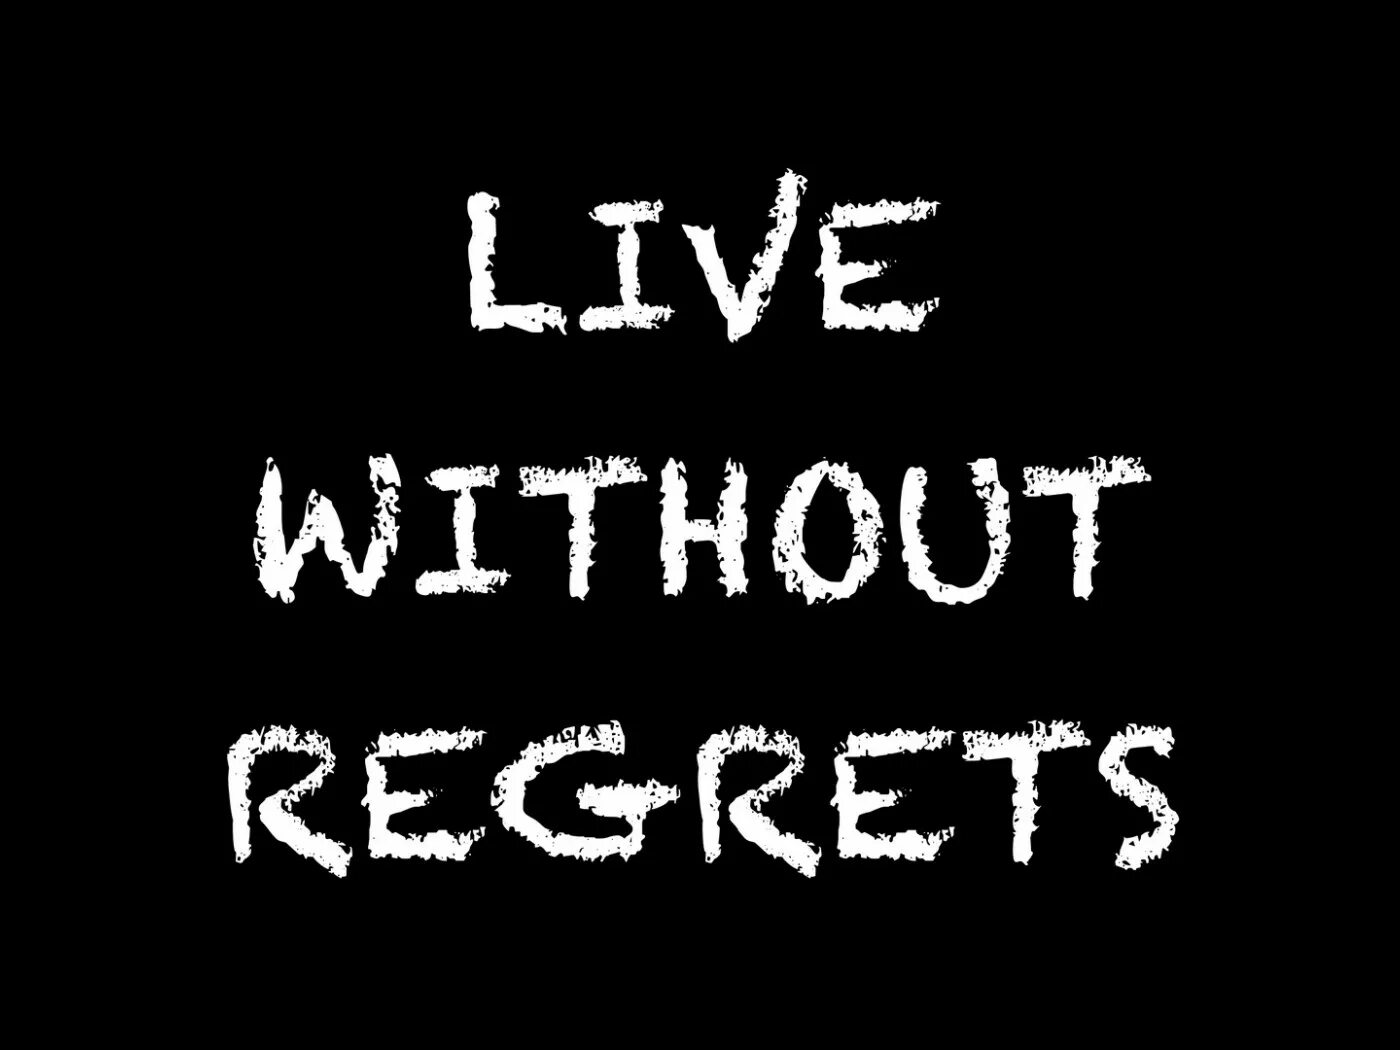 Without regretting. Live without regrets. Обои на рабочий стол со словами. Live without regrets перевод на русский. Надпись Live.